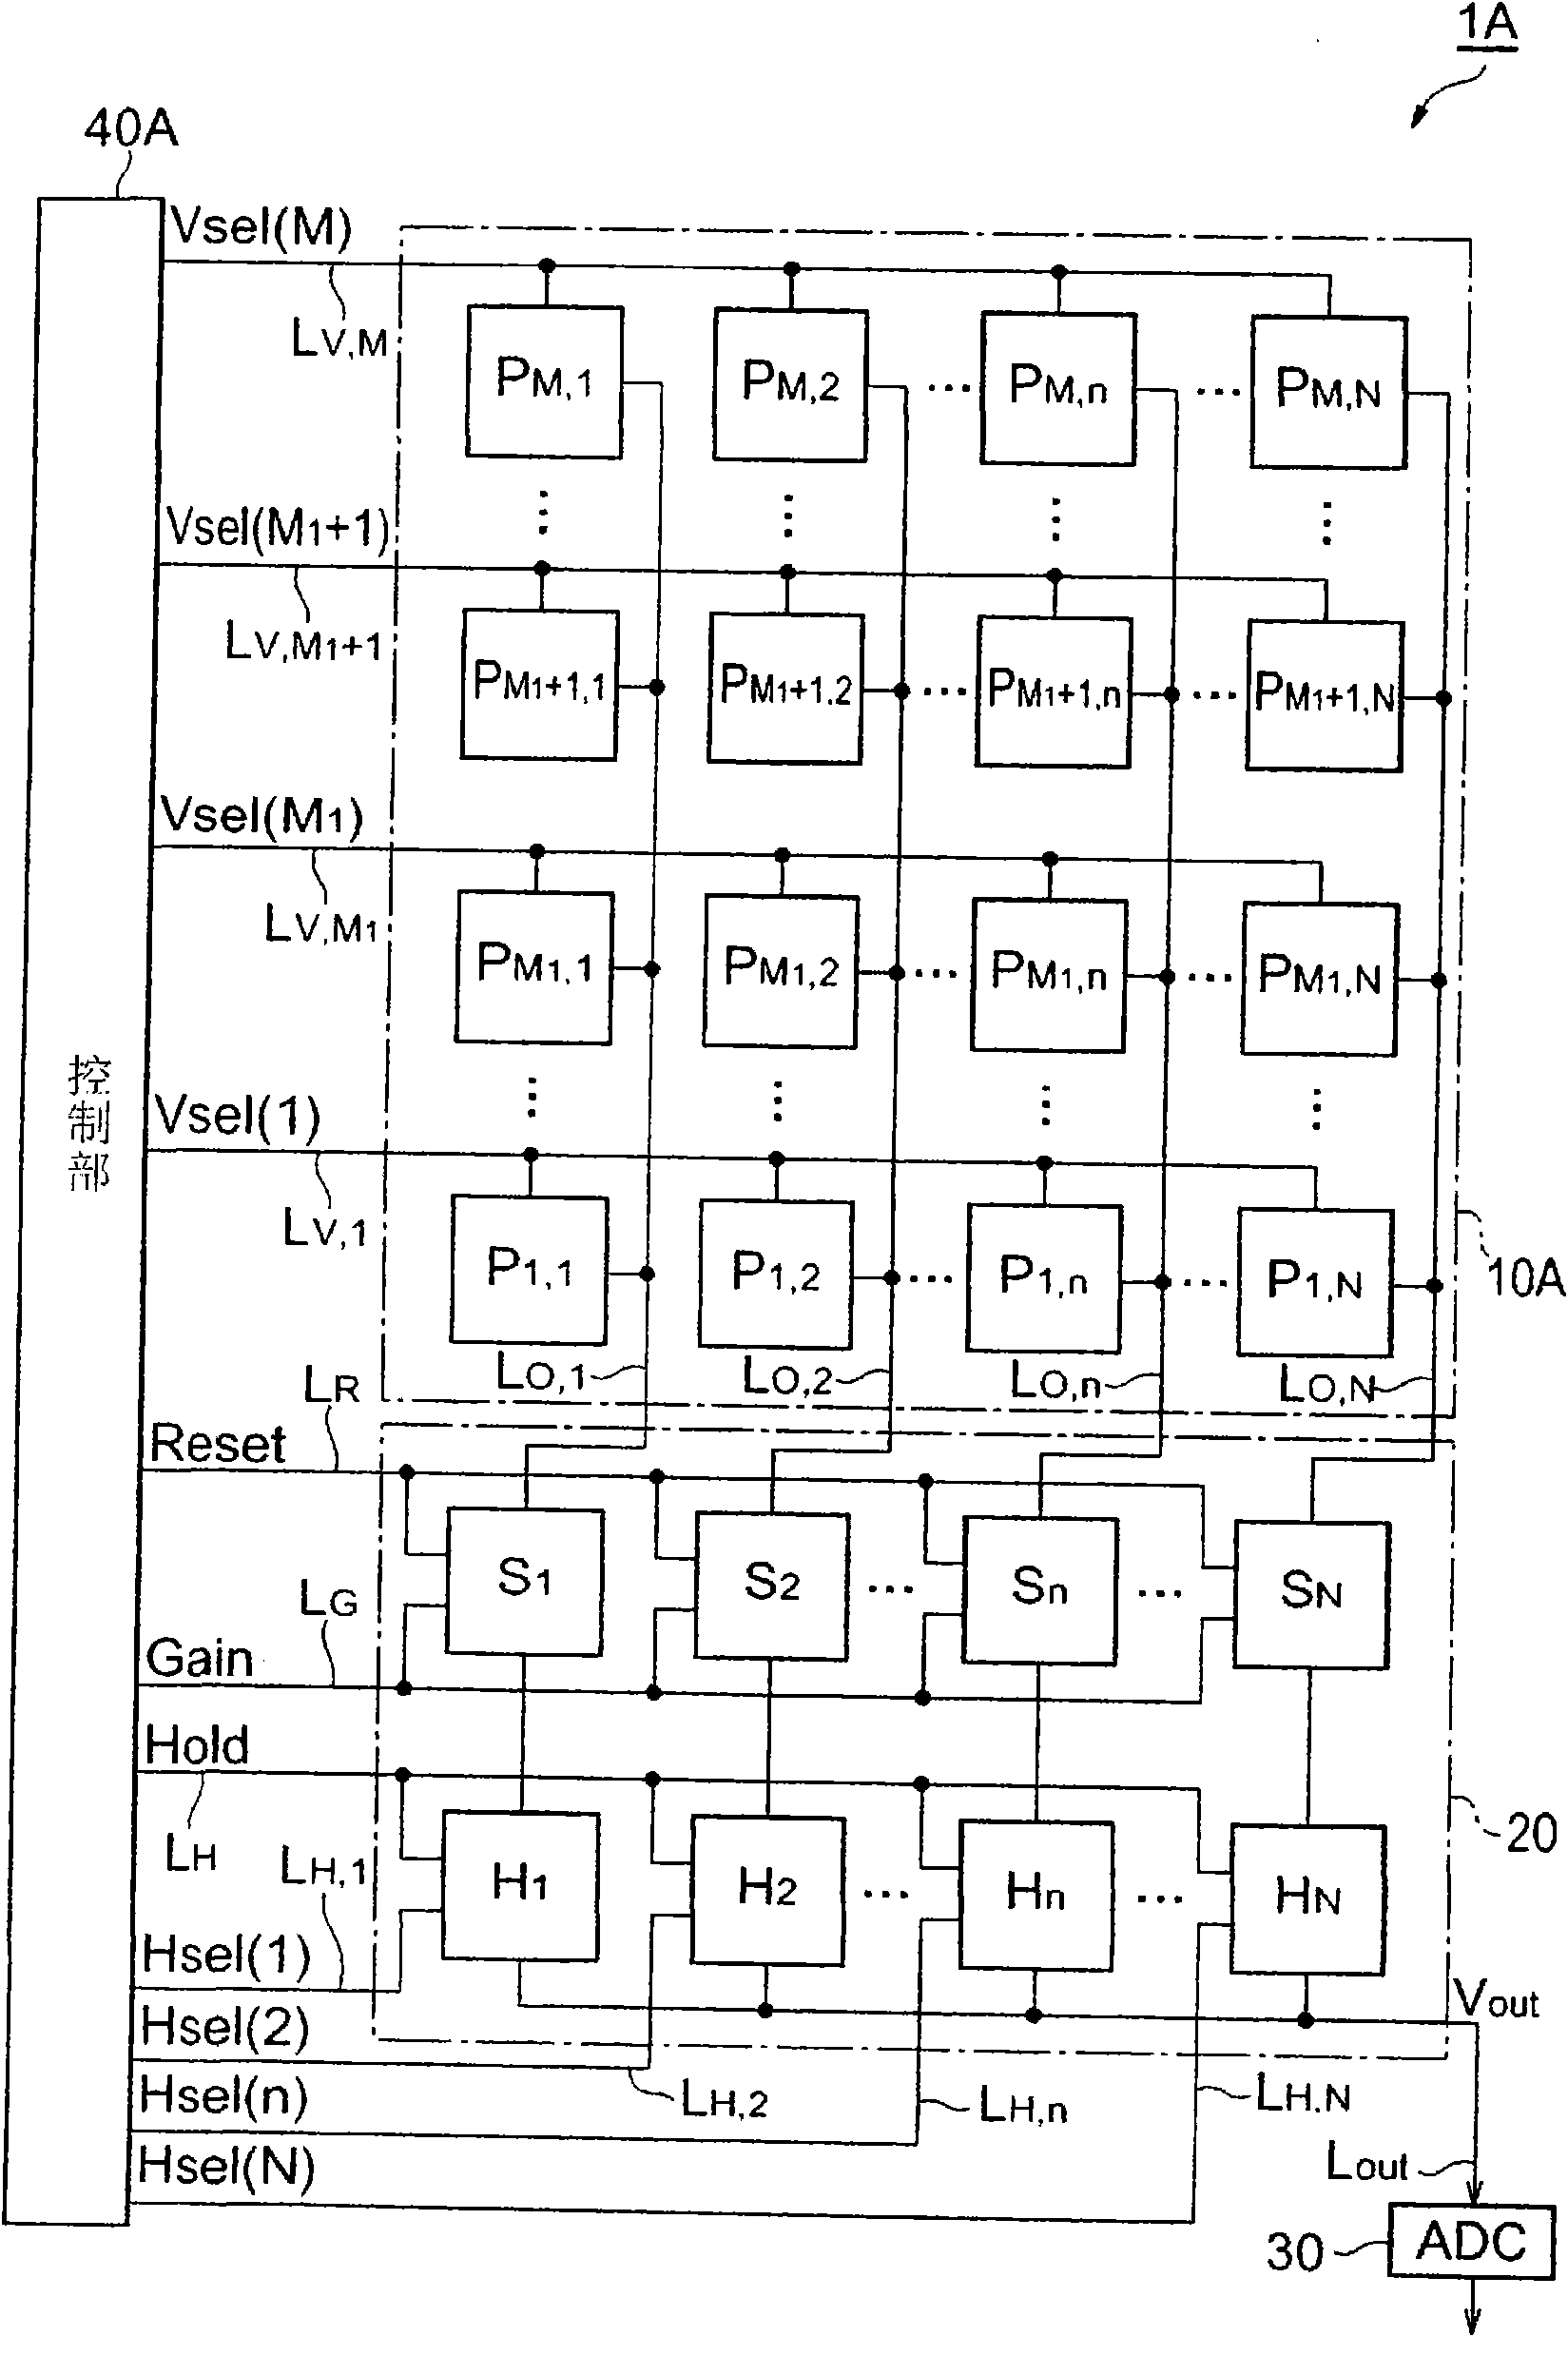 Solid-state image pickup apparatus and X-ray inspection system